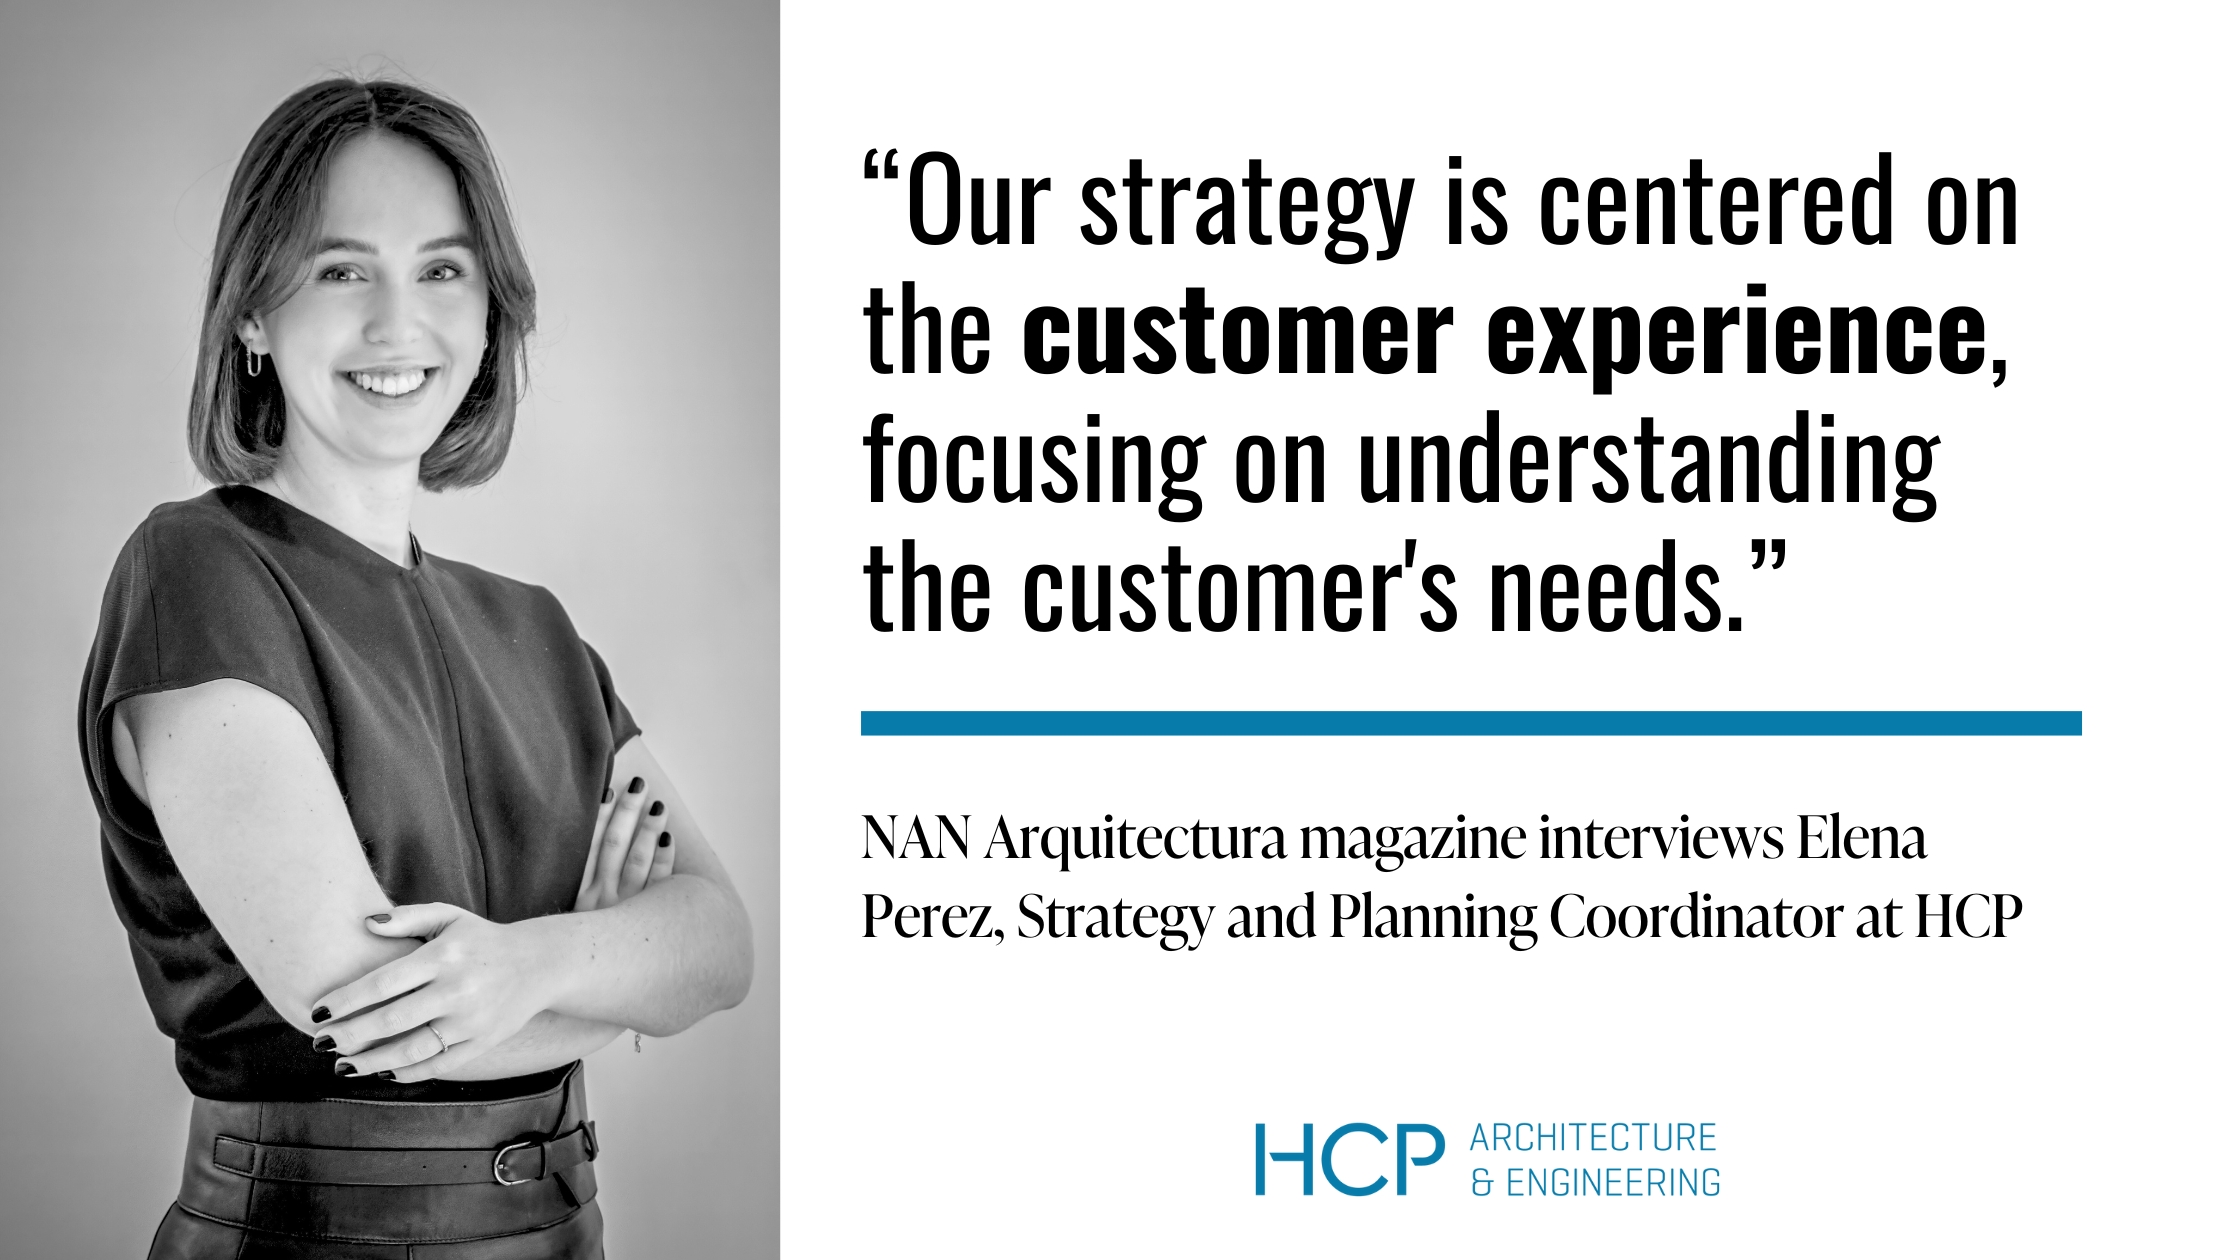 NAN Architecture interview with Elena Perez of HCP